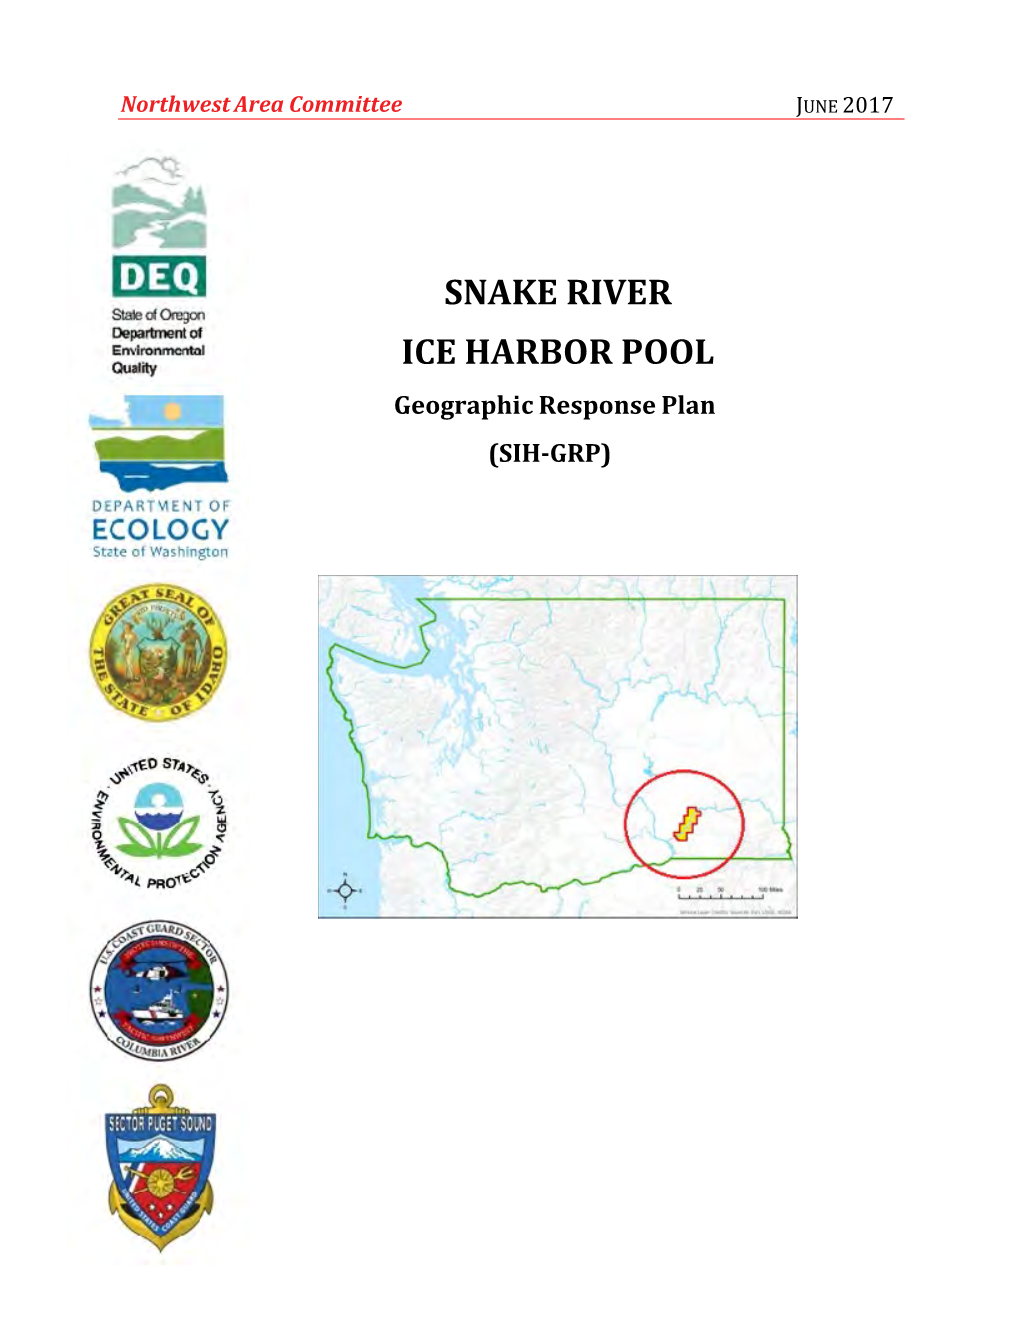 SNAKE RIVER ICE HARBOR POOL Geographic Response Plan (SIH-GRP) SNAKE RIVER ICE HARBOR POOL GRP J 2017